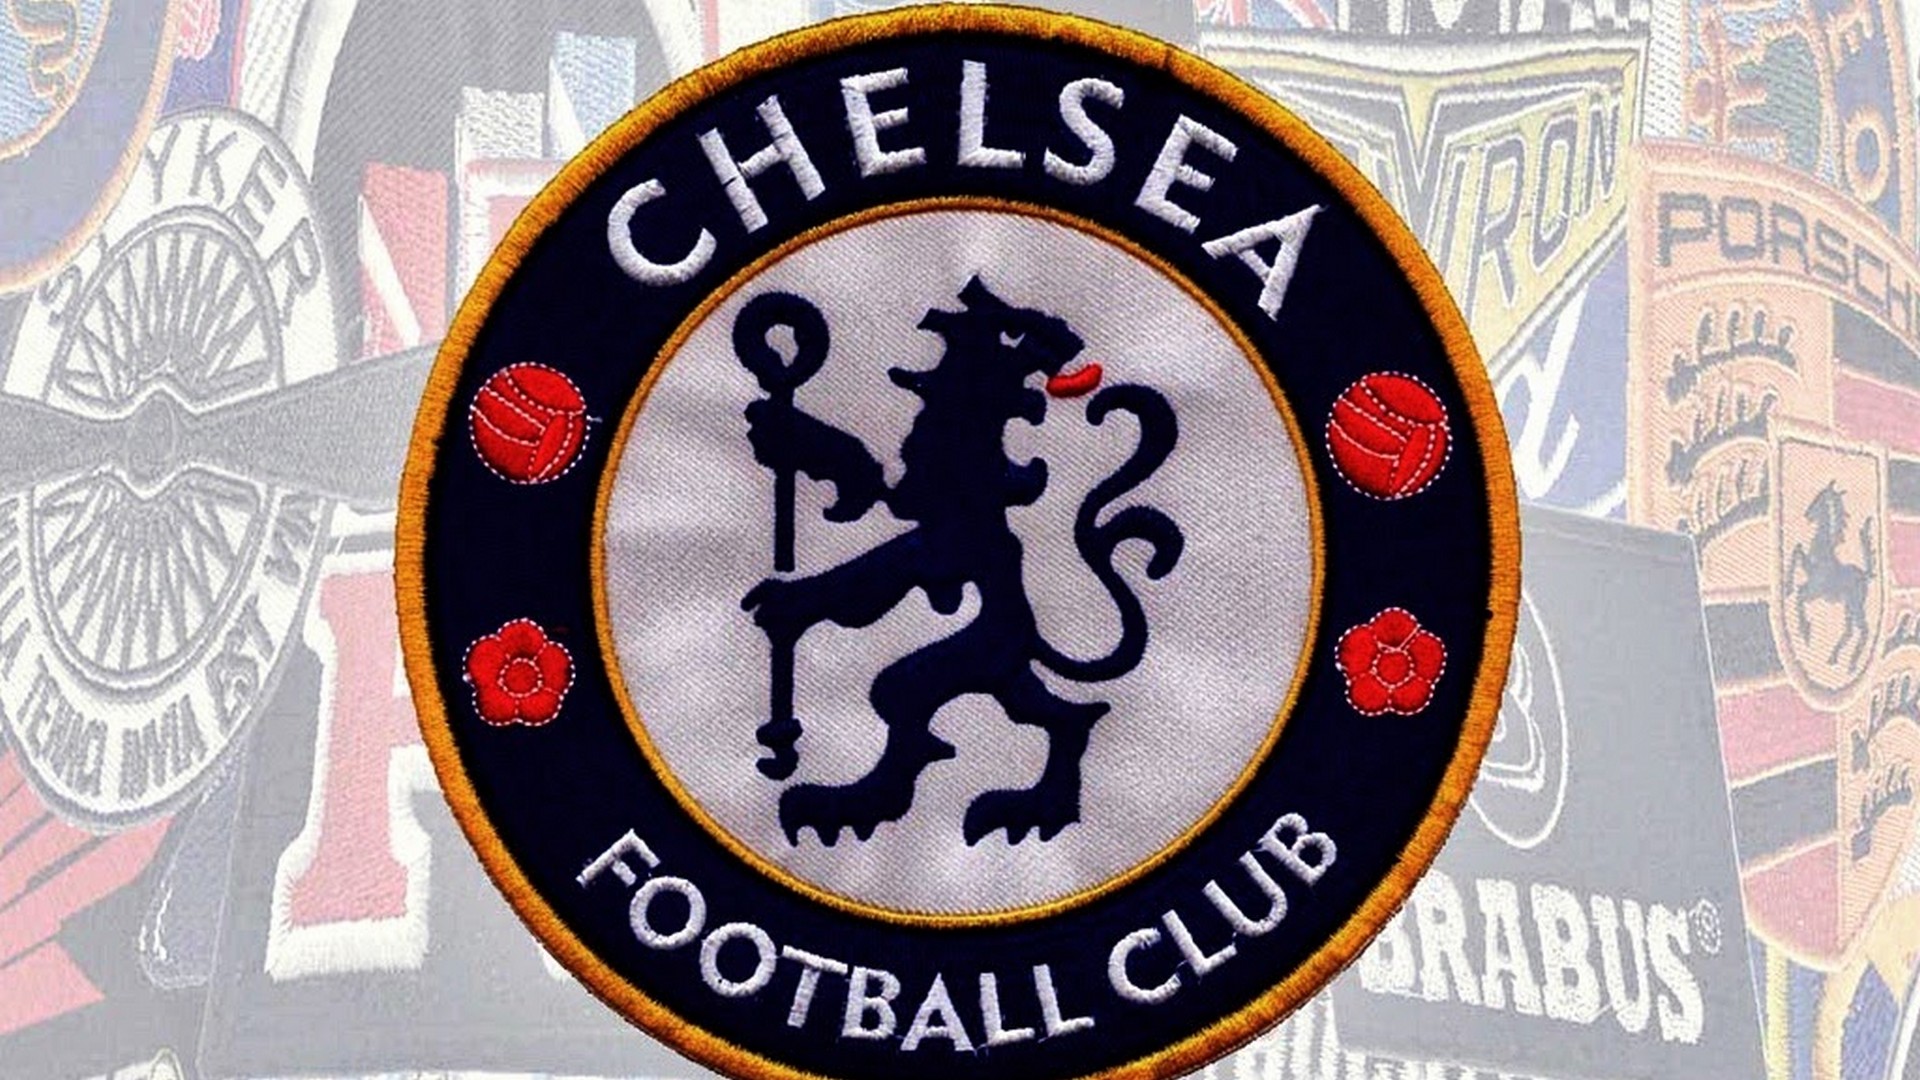 Chelsea Football Desktop Wallpapers With Resolution 1920X1080 pixel. You can make this wallpaper for your Mac or Windows Desktop Background, iPhone, Android or Tablet and another Smartphone device for free